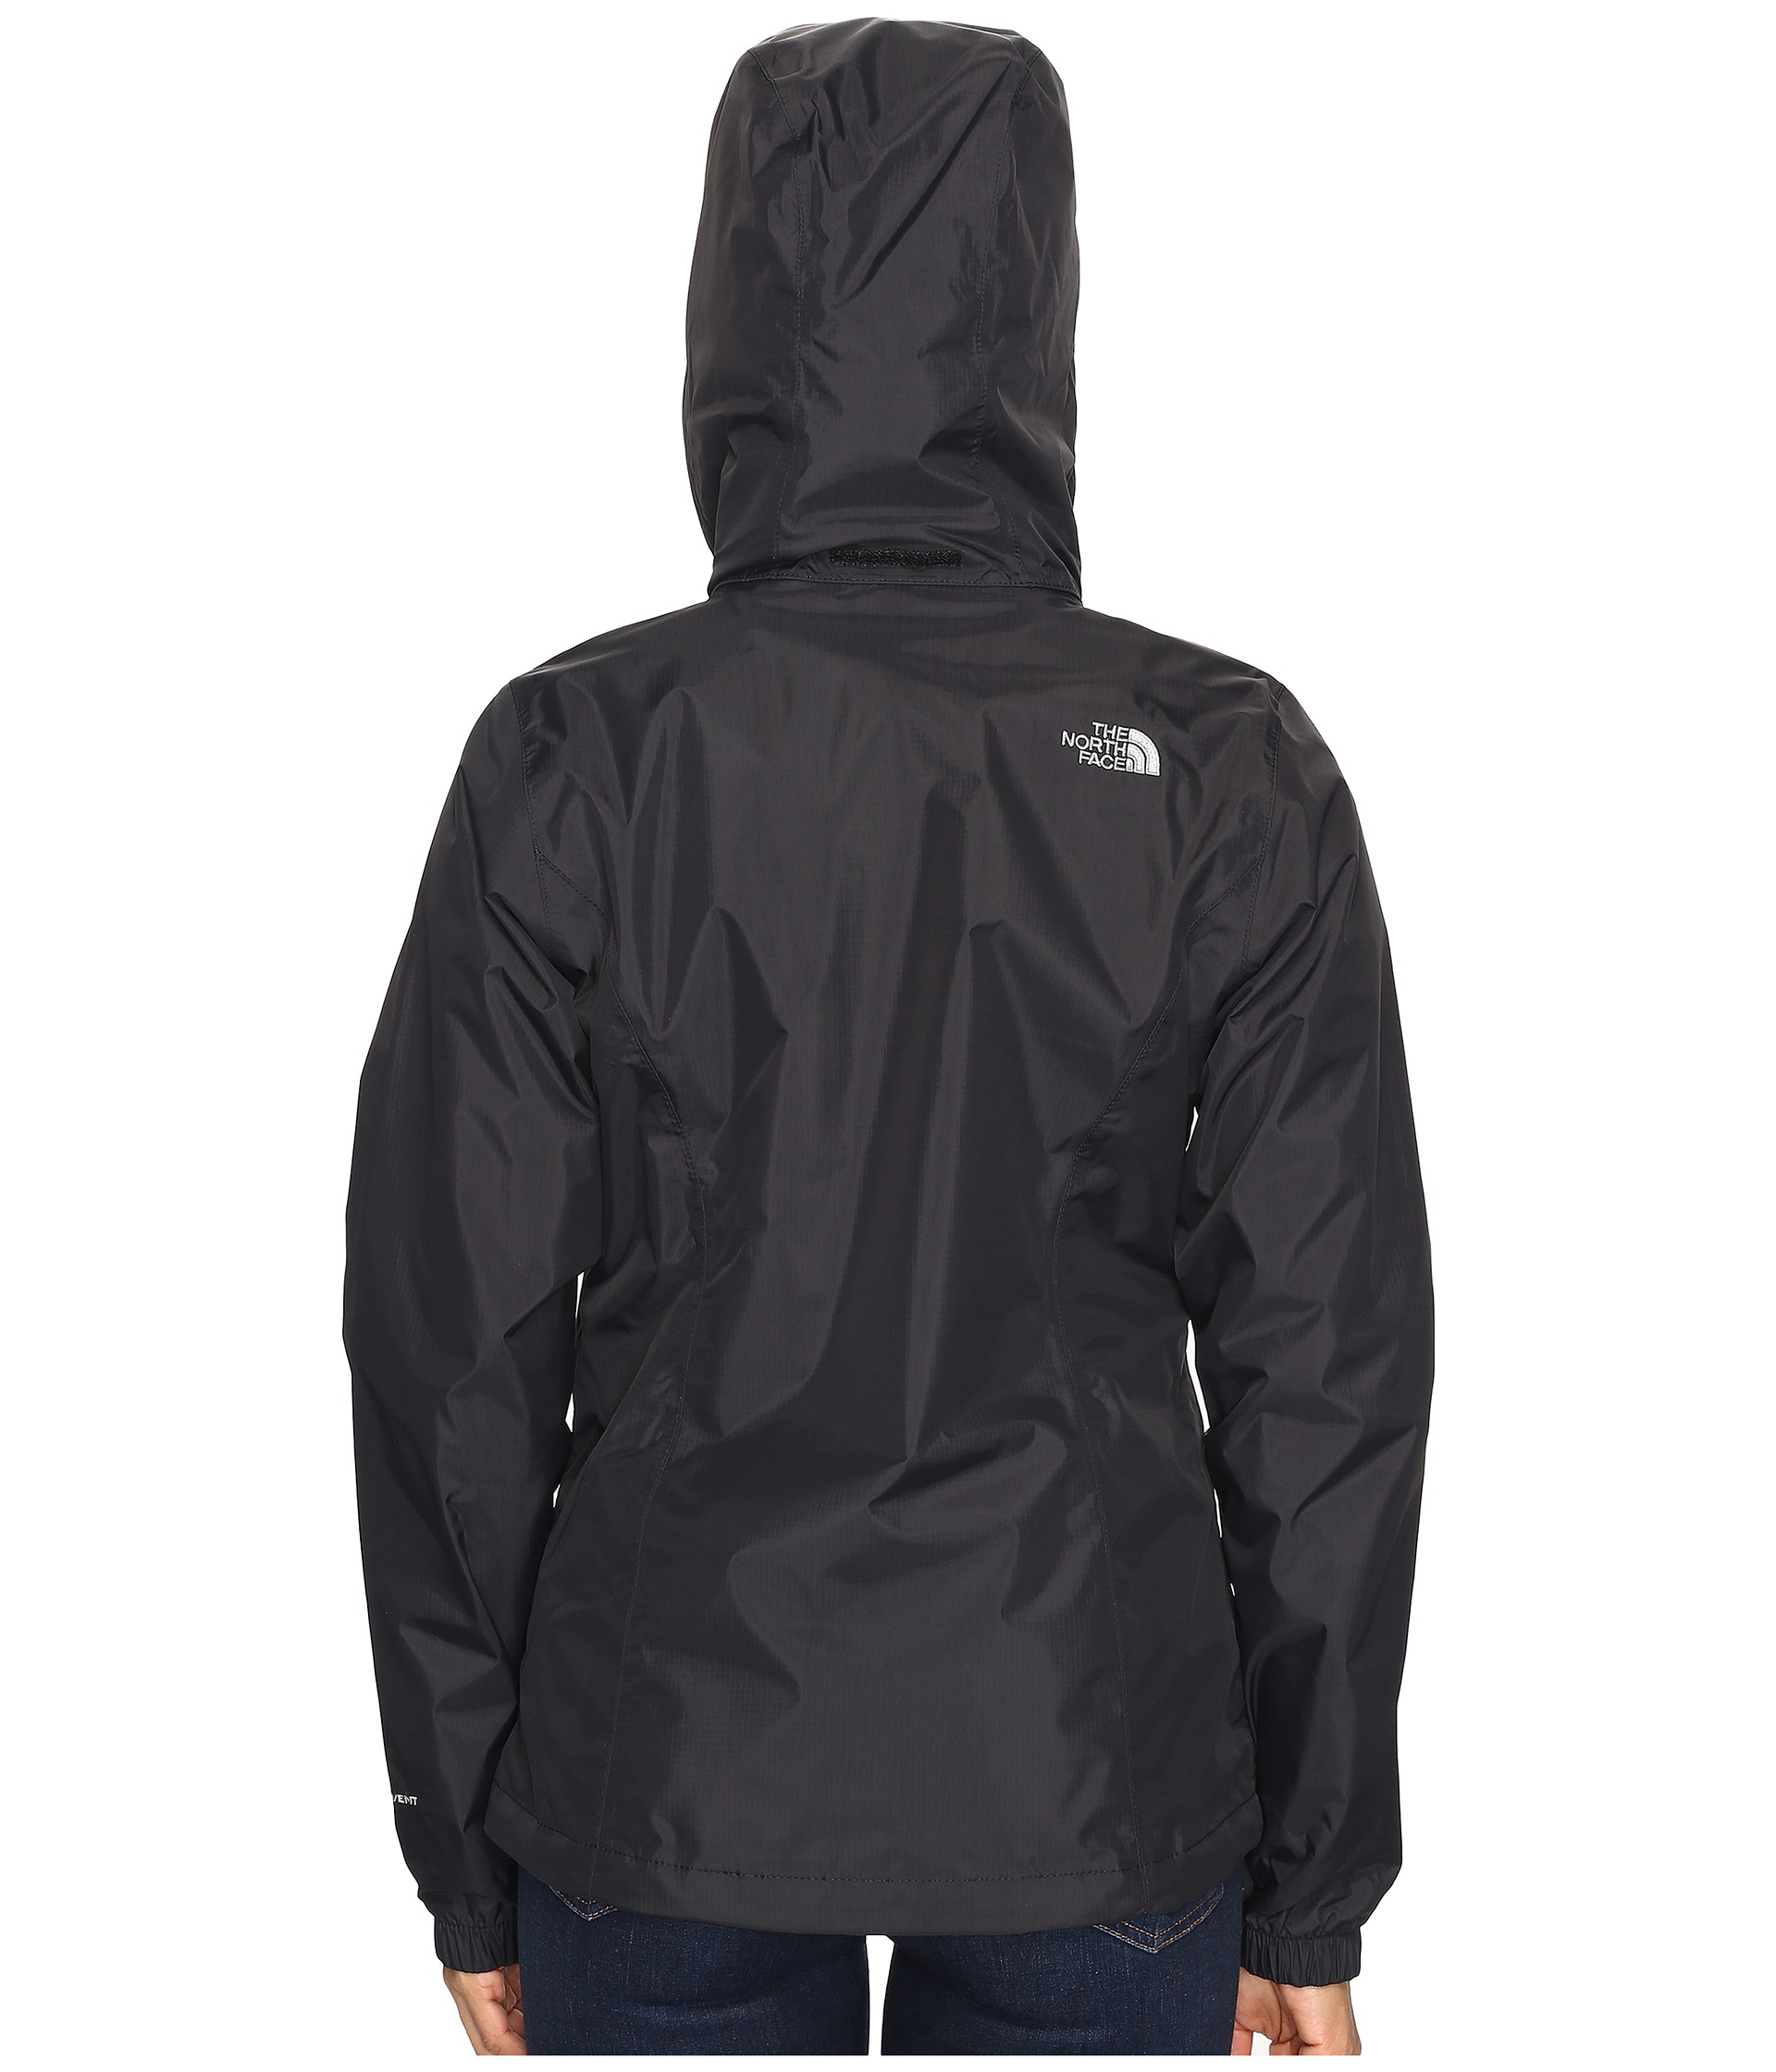 The North Face Resolve 2 Jacket - Zappos.com Free Shipping BOTH Ways